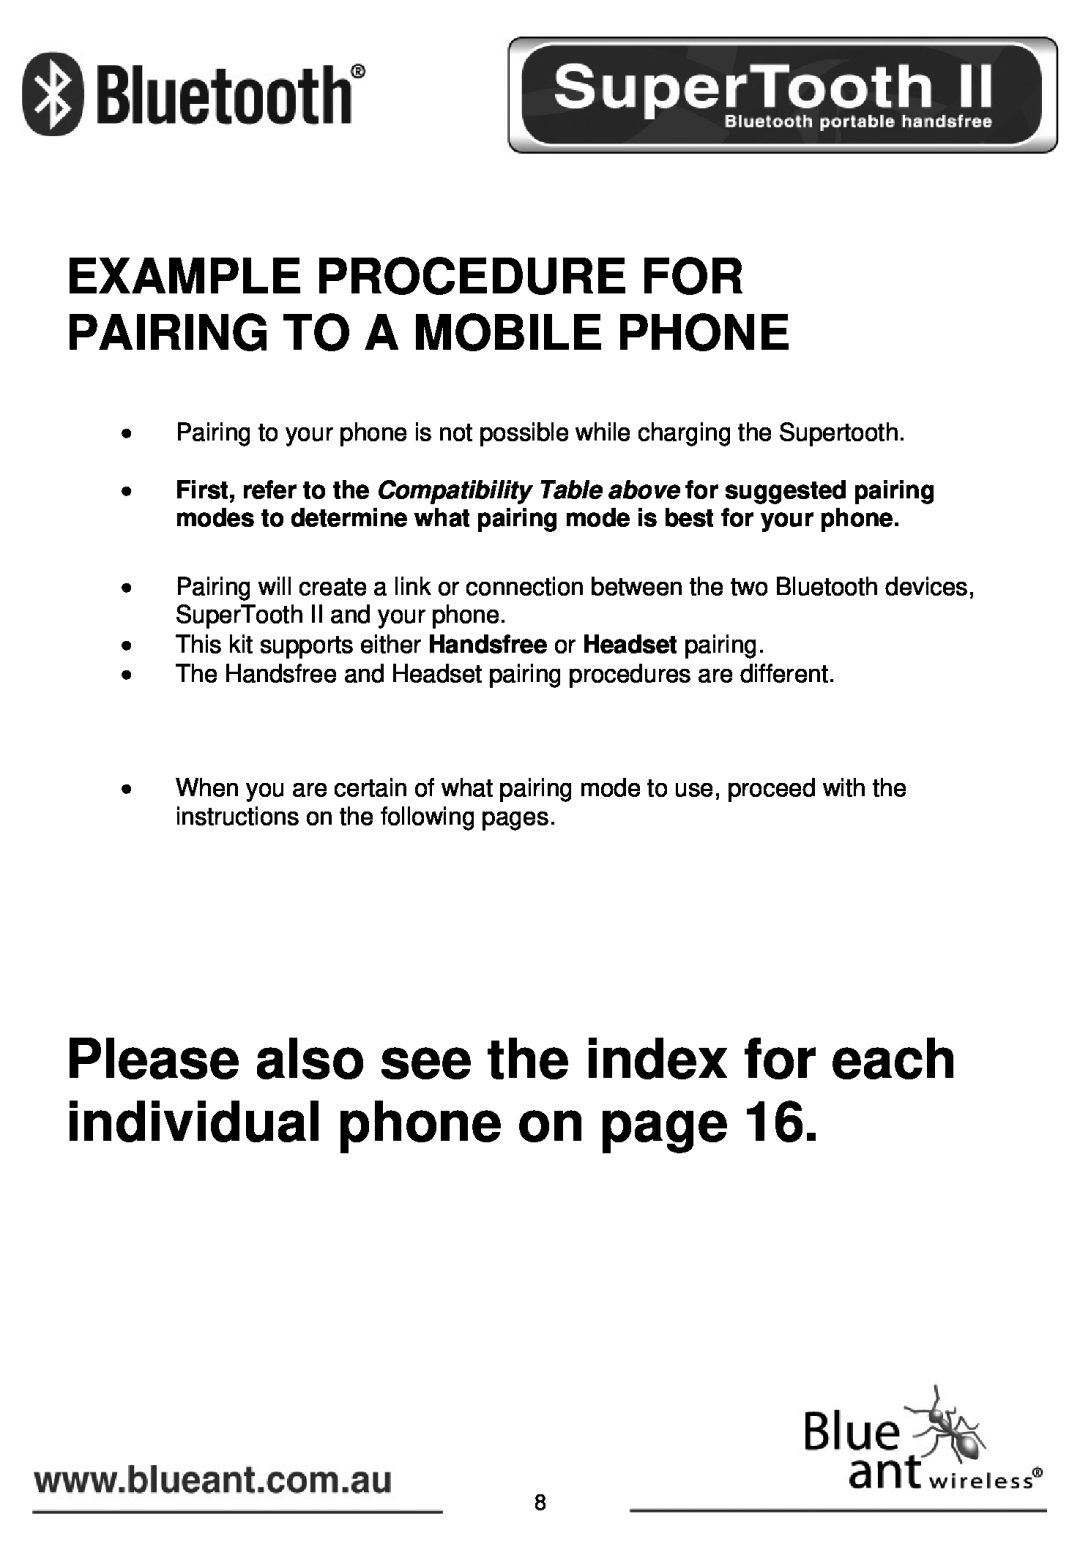 BlueAnt Wireless SUPERTOOTH II manual Example Procedure For Pairing To A Mobile Phone 